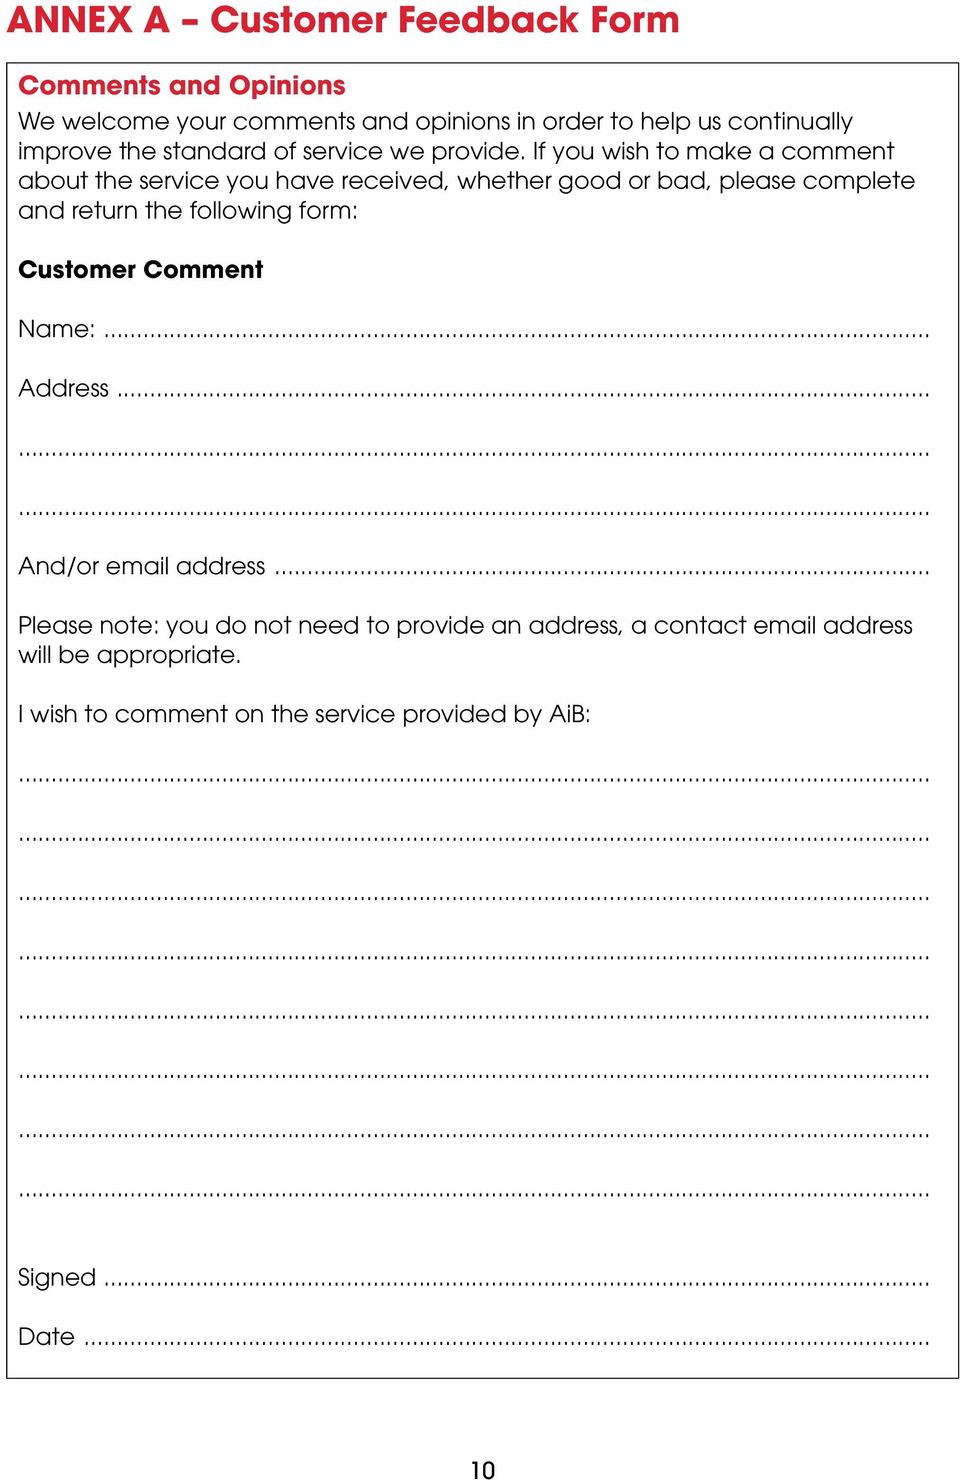 If you wish to make a comment about the service you have received, whether good or bad, please complete and return the following